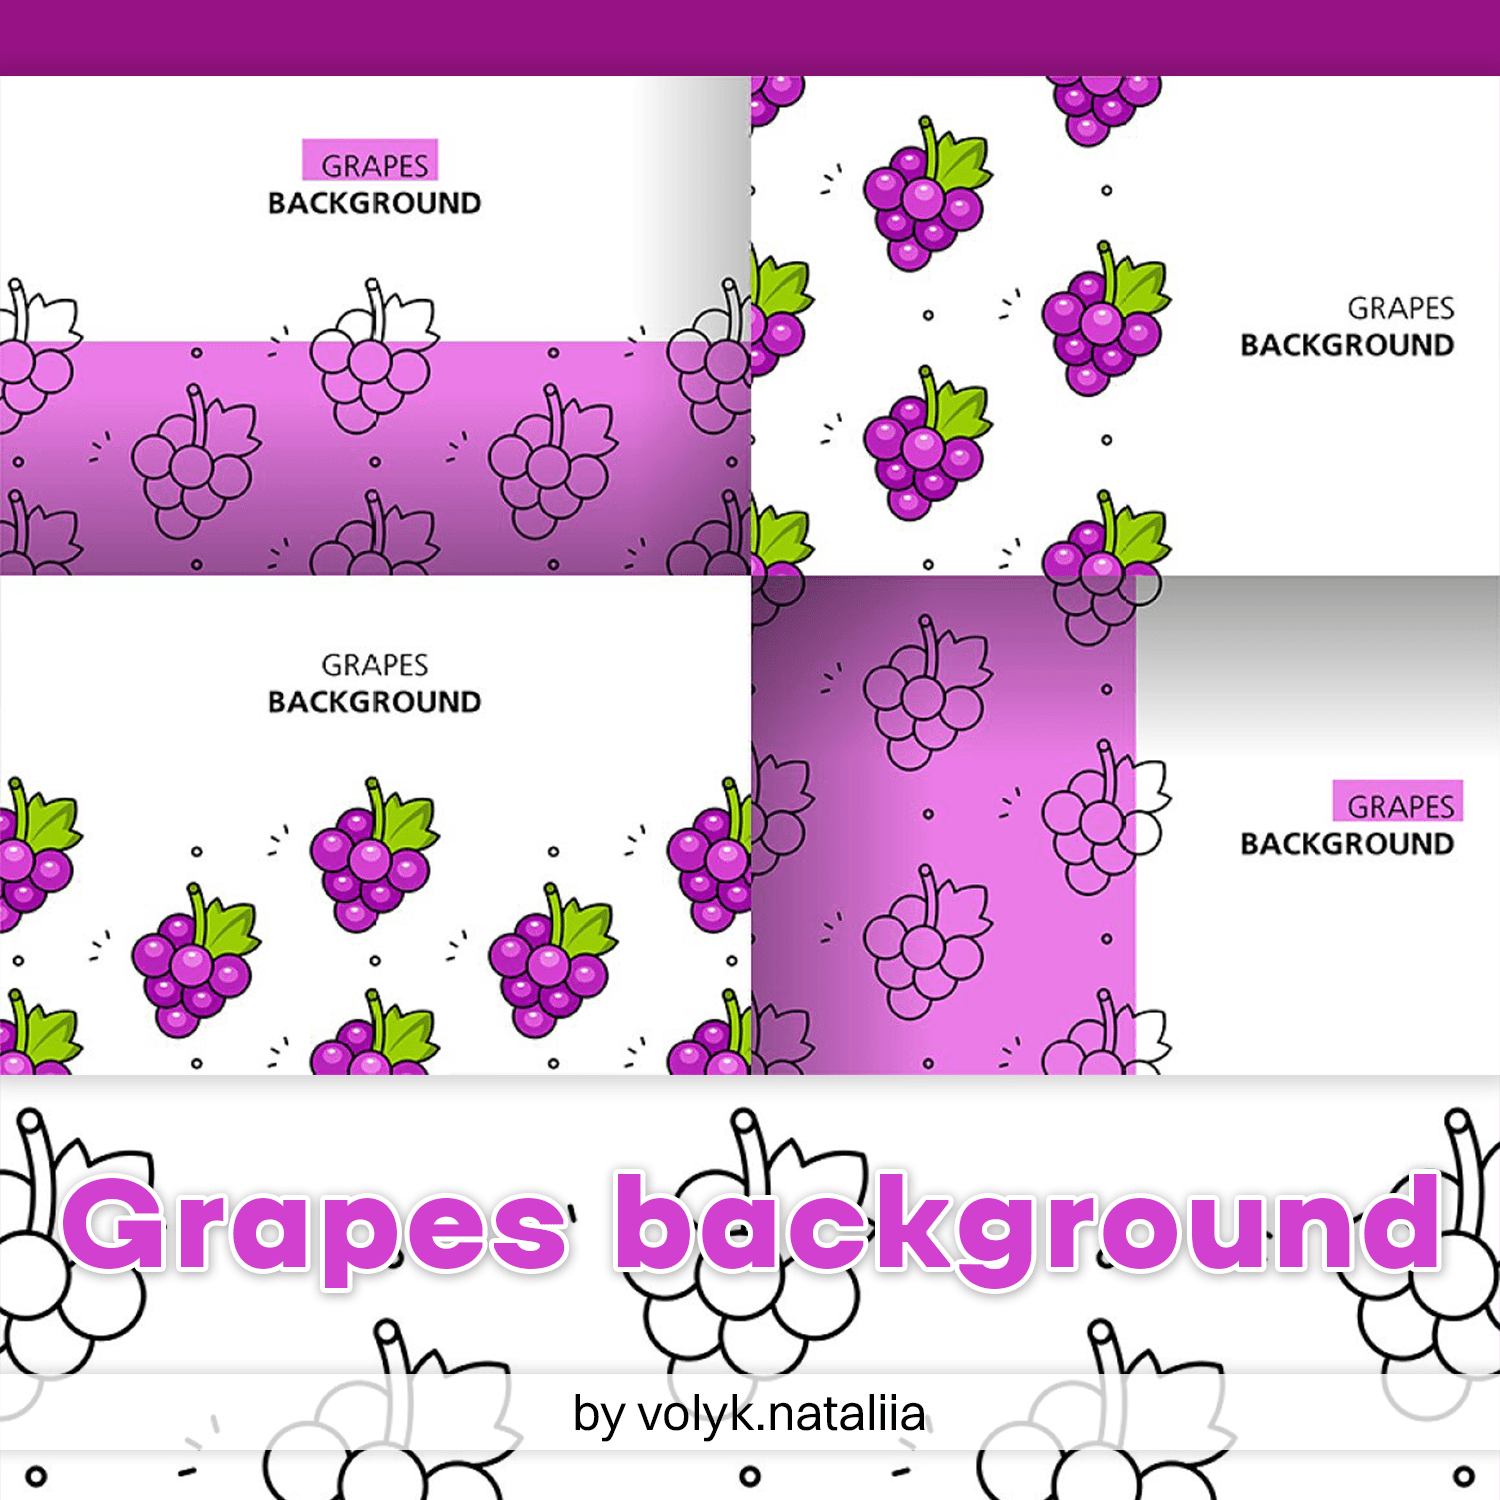 Grapes background - main image preview.